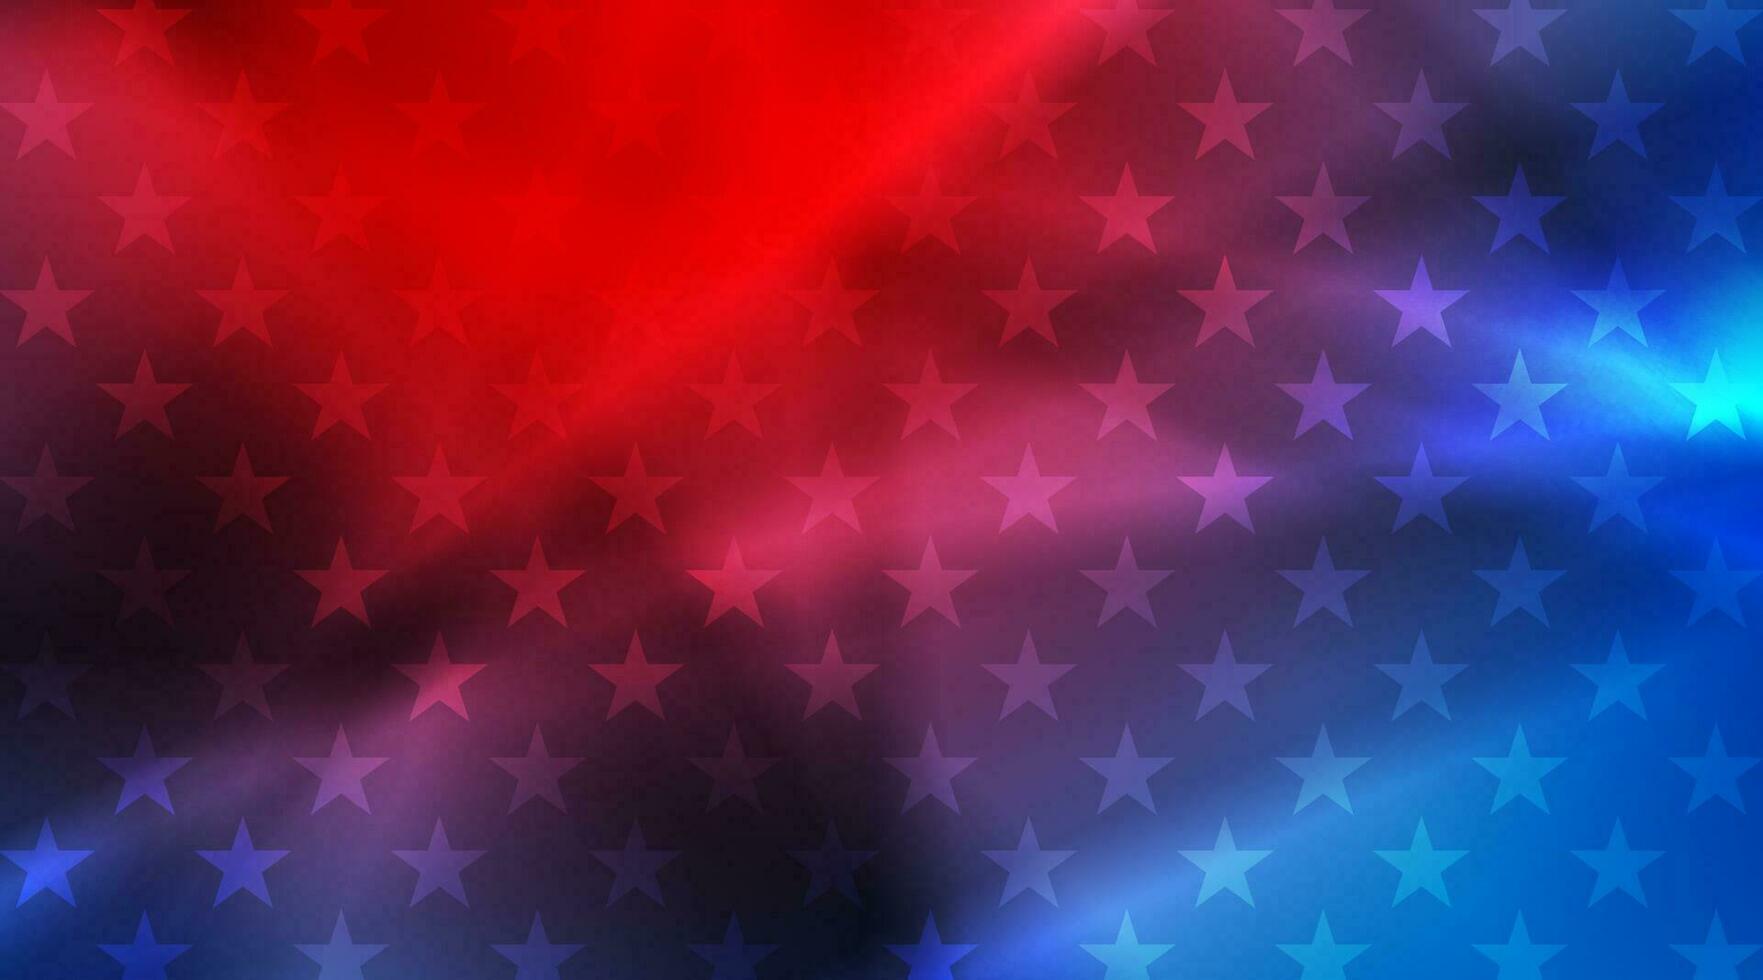 USA flag colors, stars and smooth stripes abstract background vector